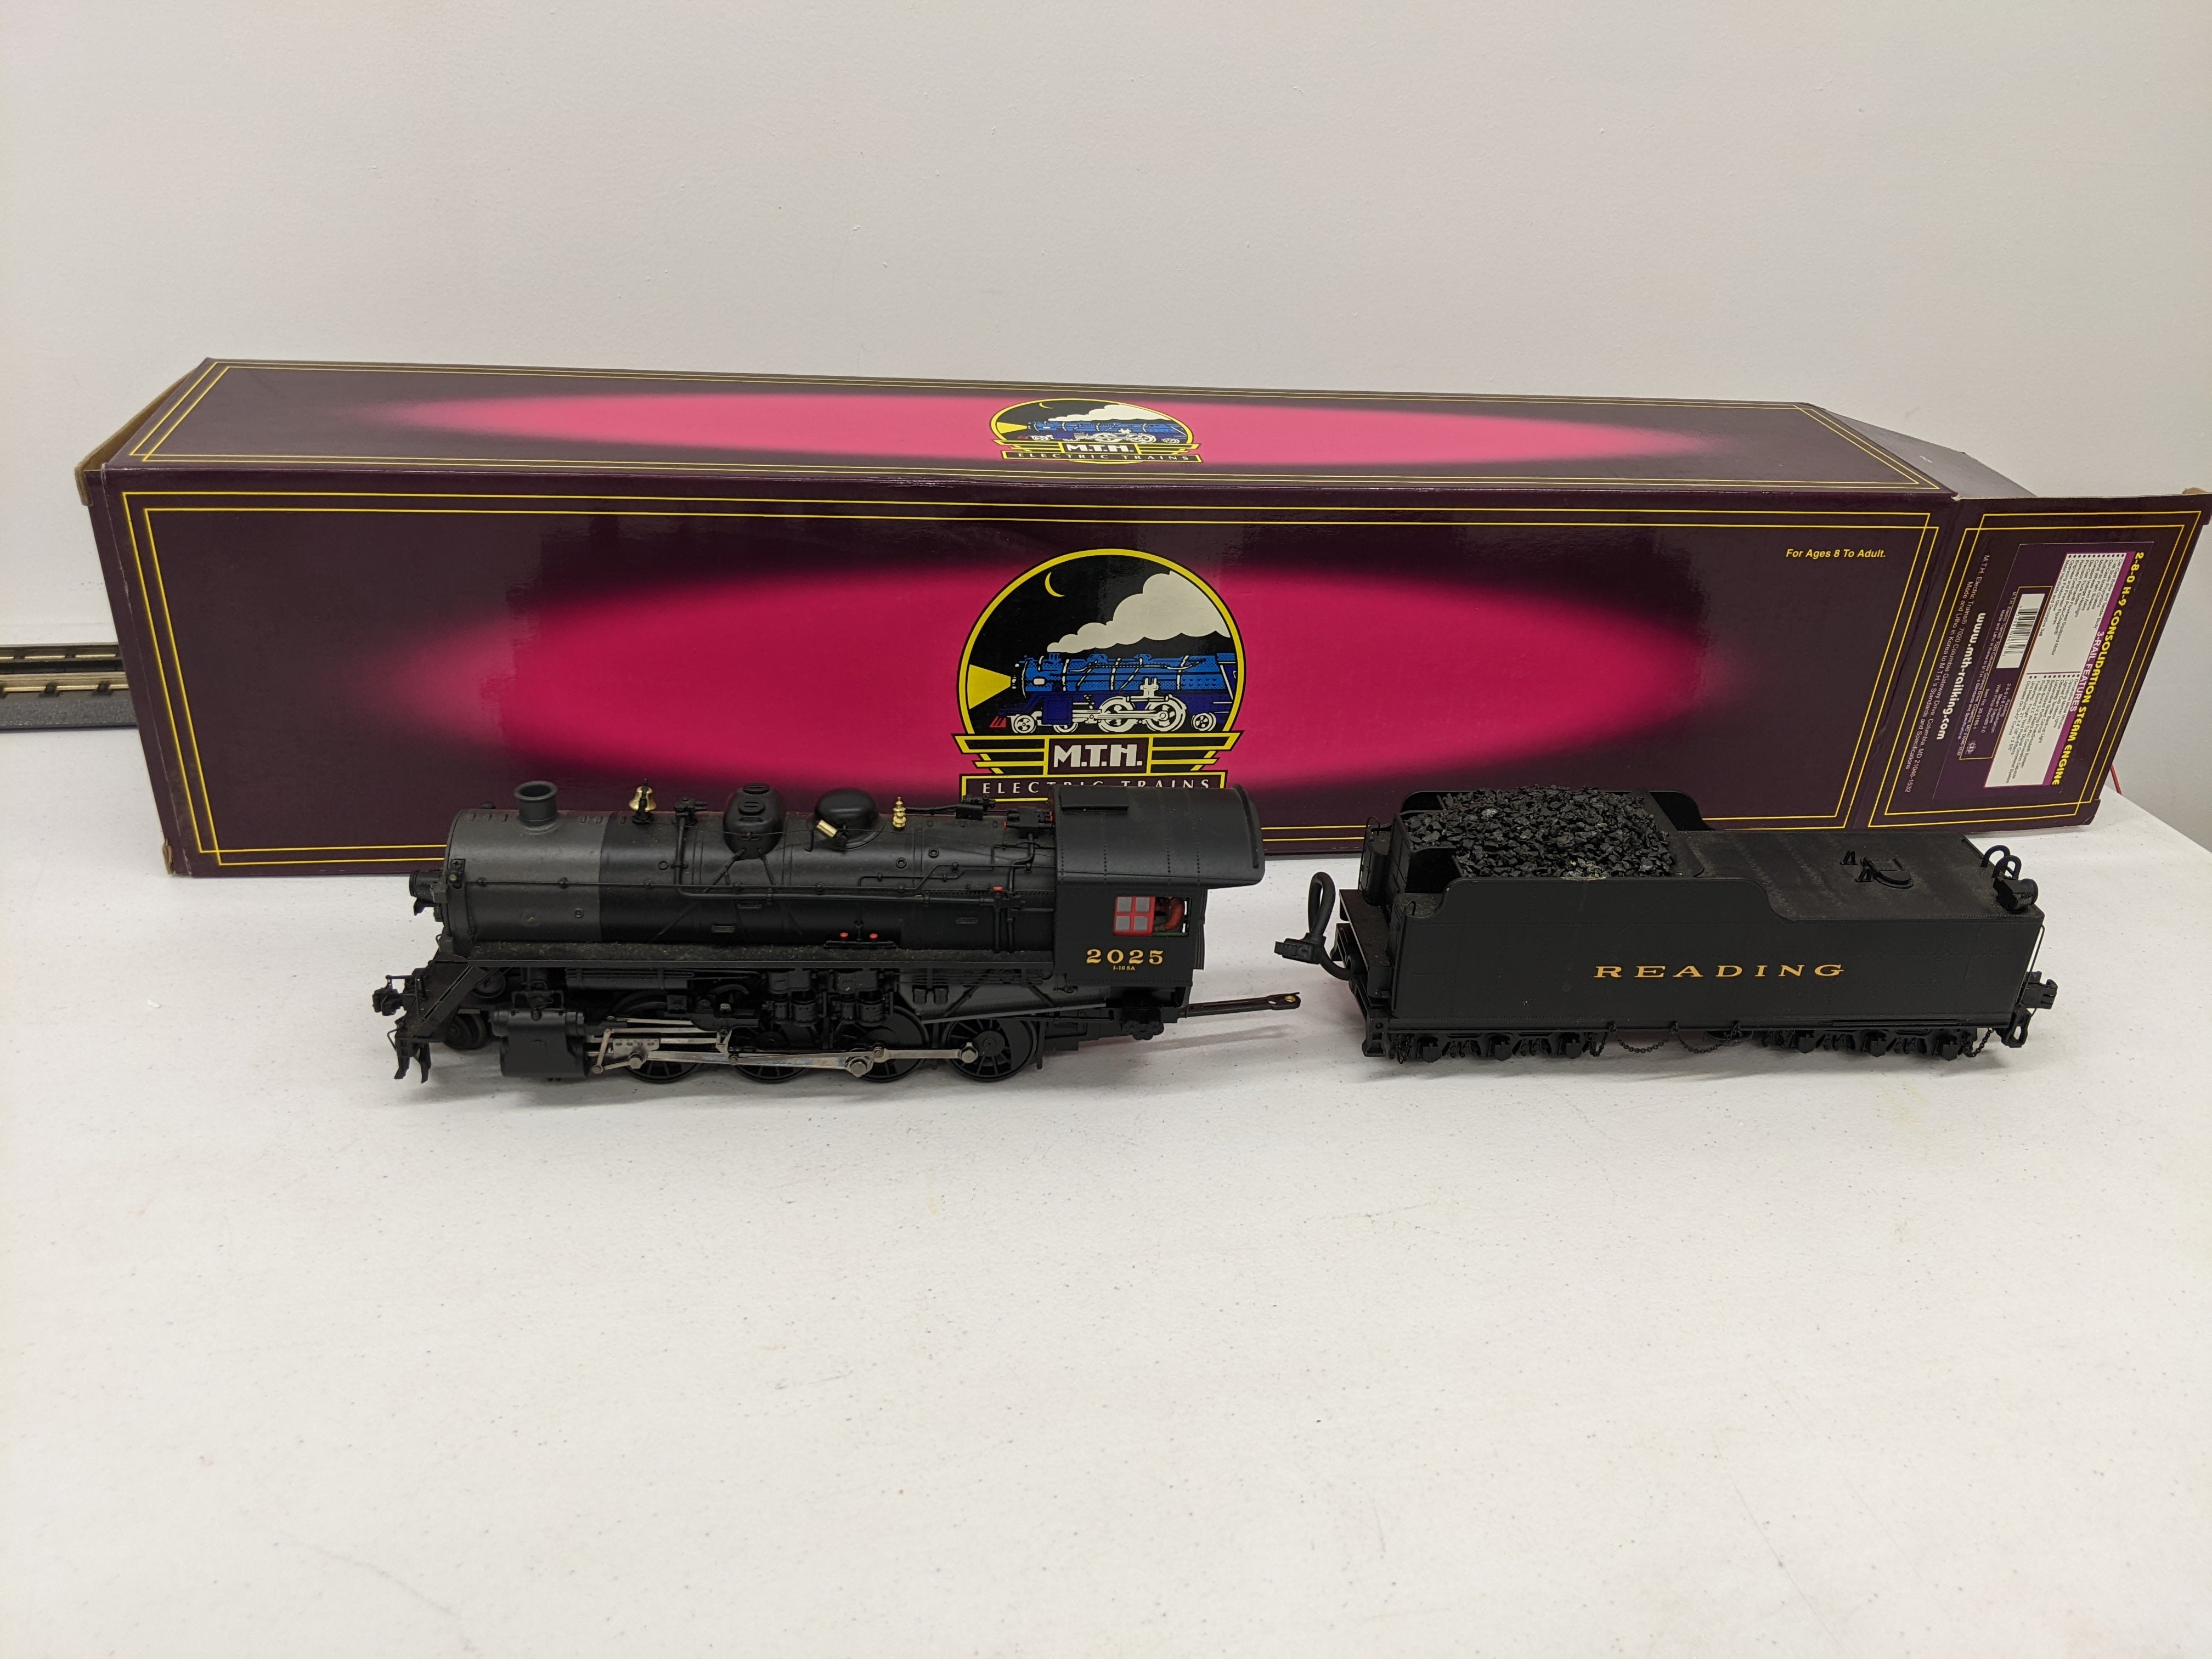 USED MTH Premier 20-3165-1 O Scale, 2-8-0 H-9 Consolidation Steam Engine, Reading #2025 (Proto-Sound 2.0)